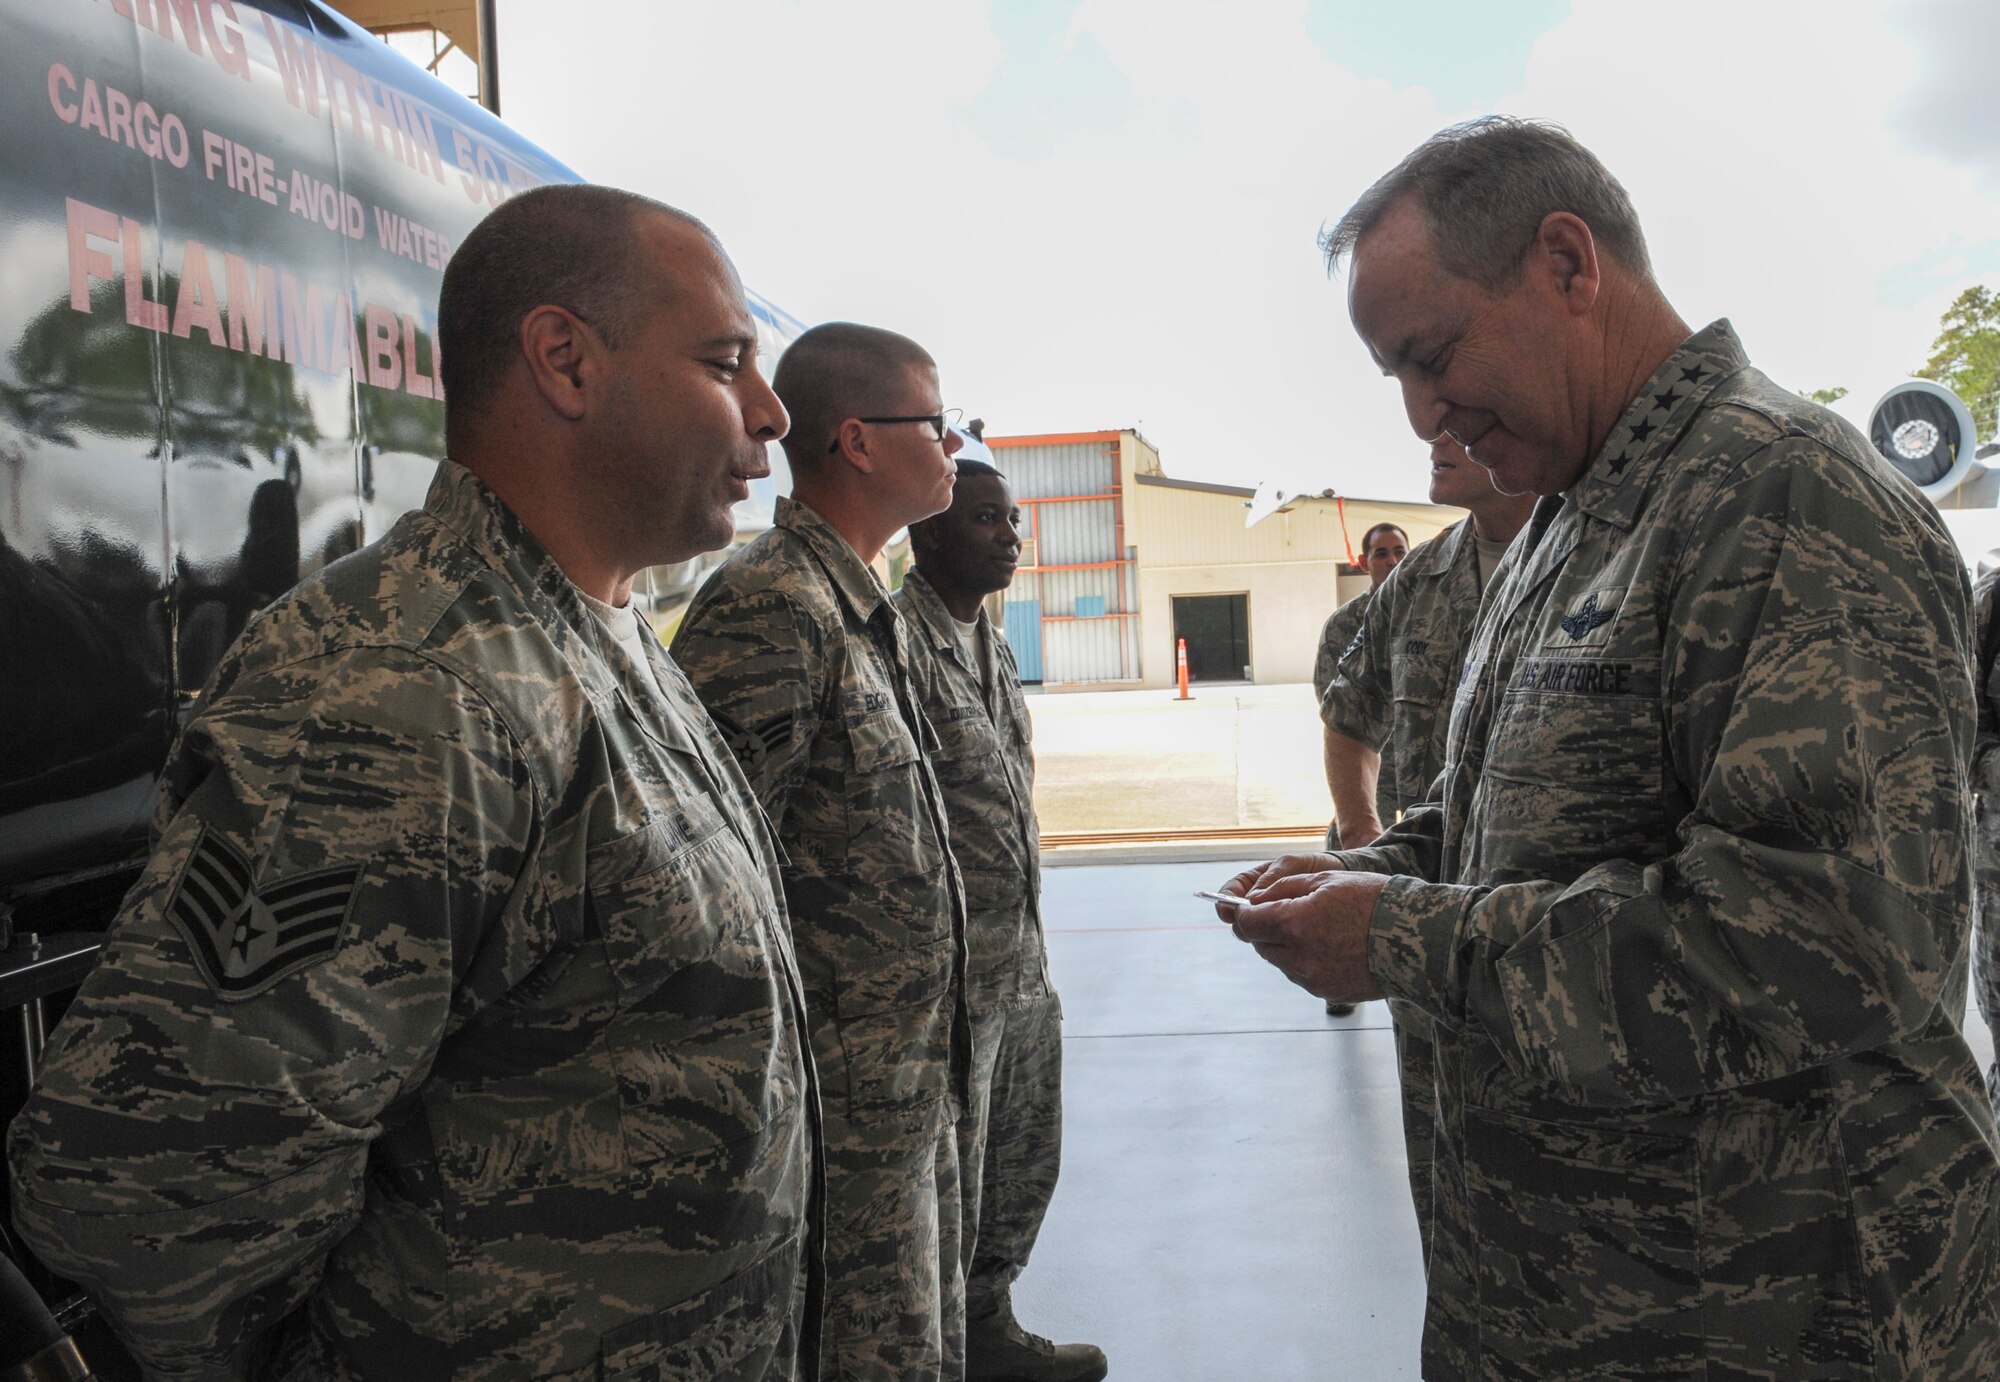 U.S. Air Force Staff Sgt. Jason Lane, 23d Logistics Readiness Squadron fuels management flight, presents a coin to Air Force Chief of Staff Gen. Mark A. Welsh III, April 1, 2013, at Moody Air Force Base, Ga. Welsh and Chief Master Sgt. of the Air Force James Cody came to the base to meet with Airmen, thank them for their service and talk about issues affecting the Air Force. (U.S. Air Force photo by Airman Alexis Grotz)